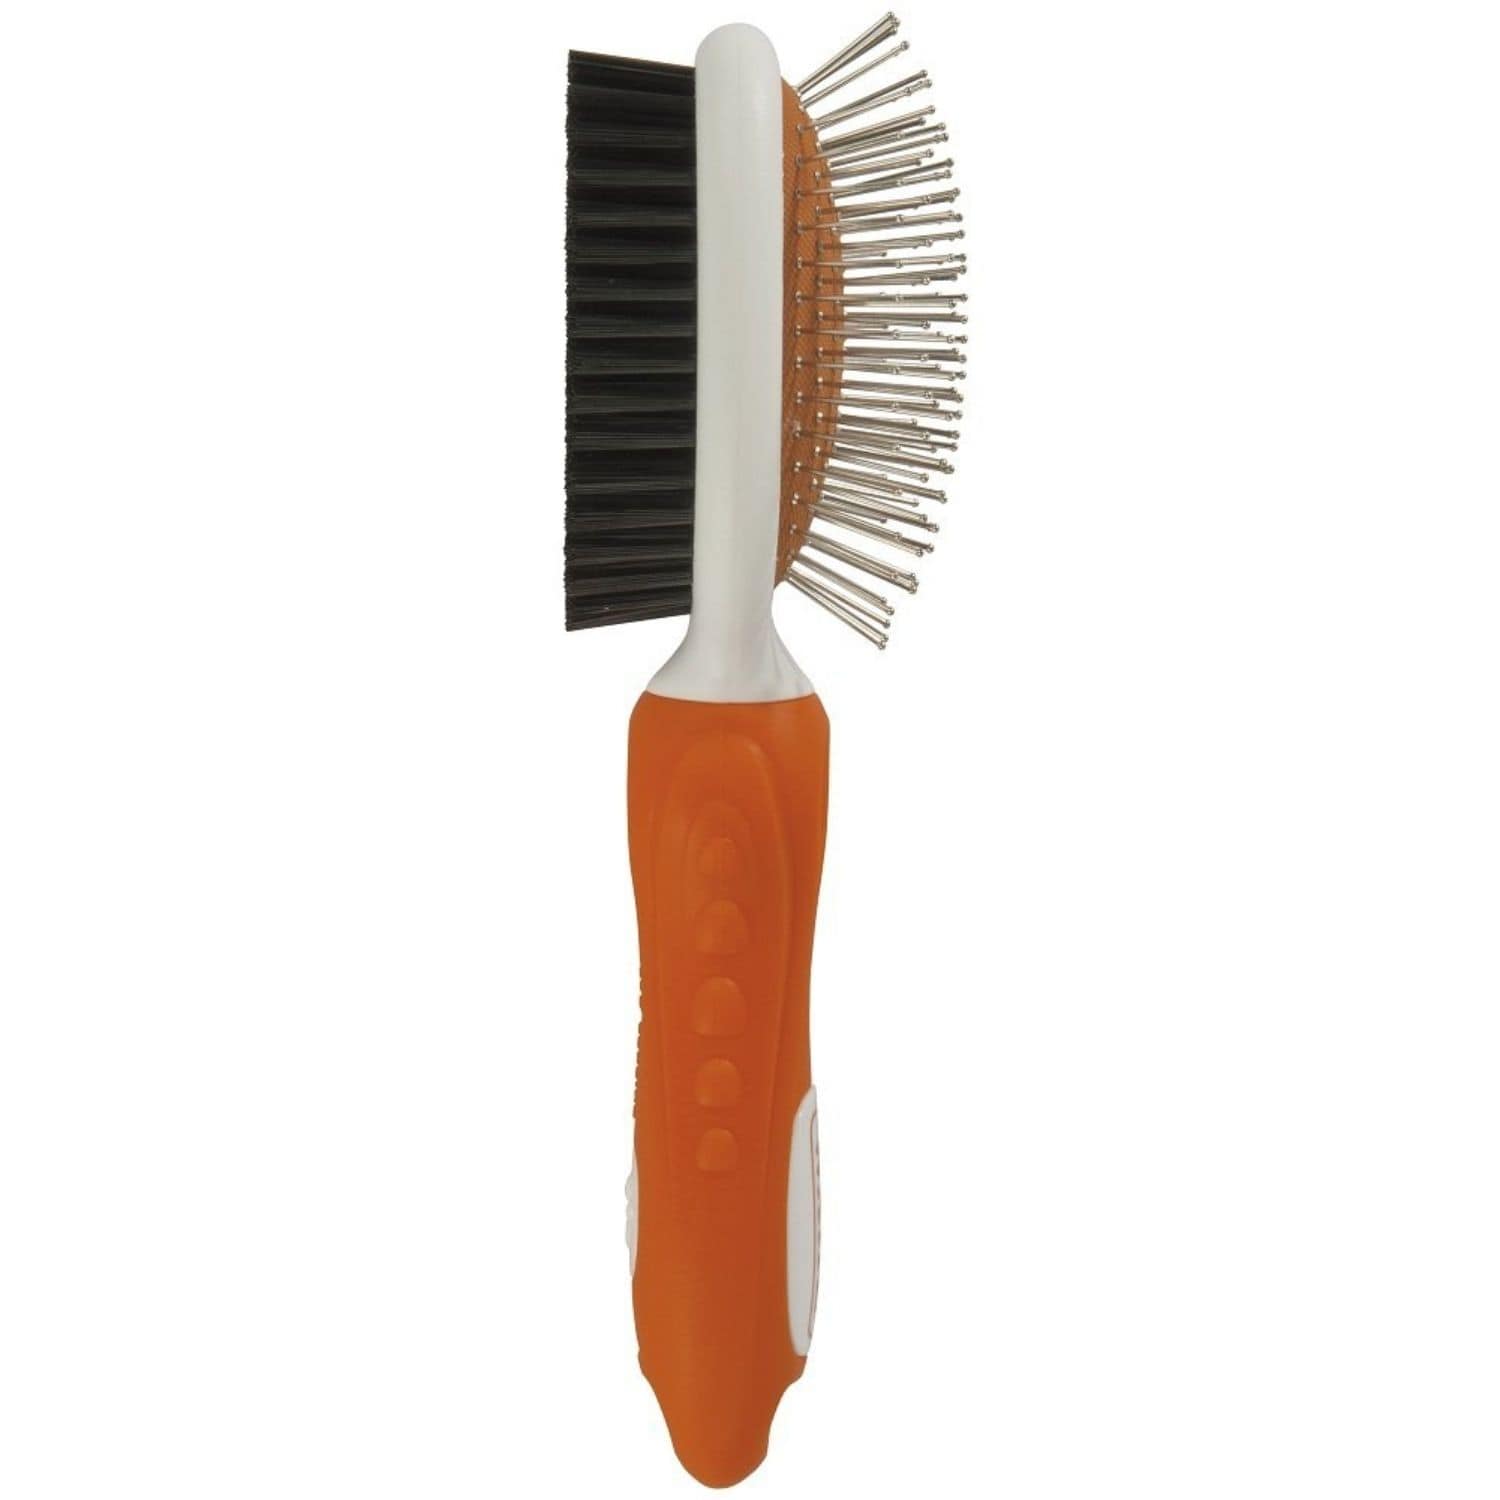 WAHL Double sided brush for dogs & cats - Petsgool Online